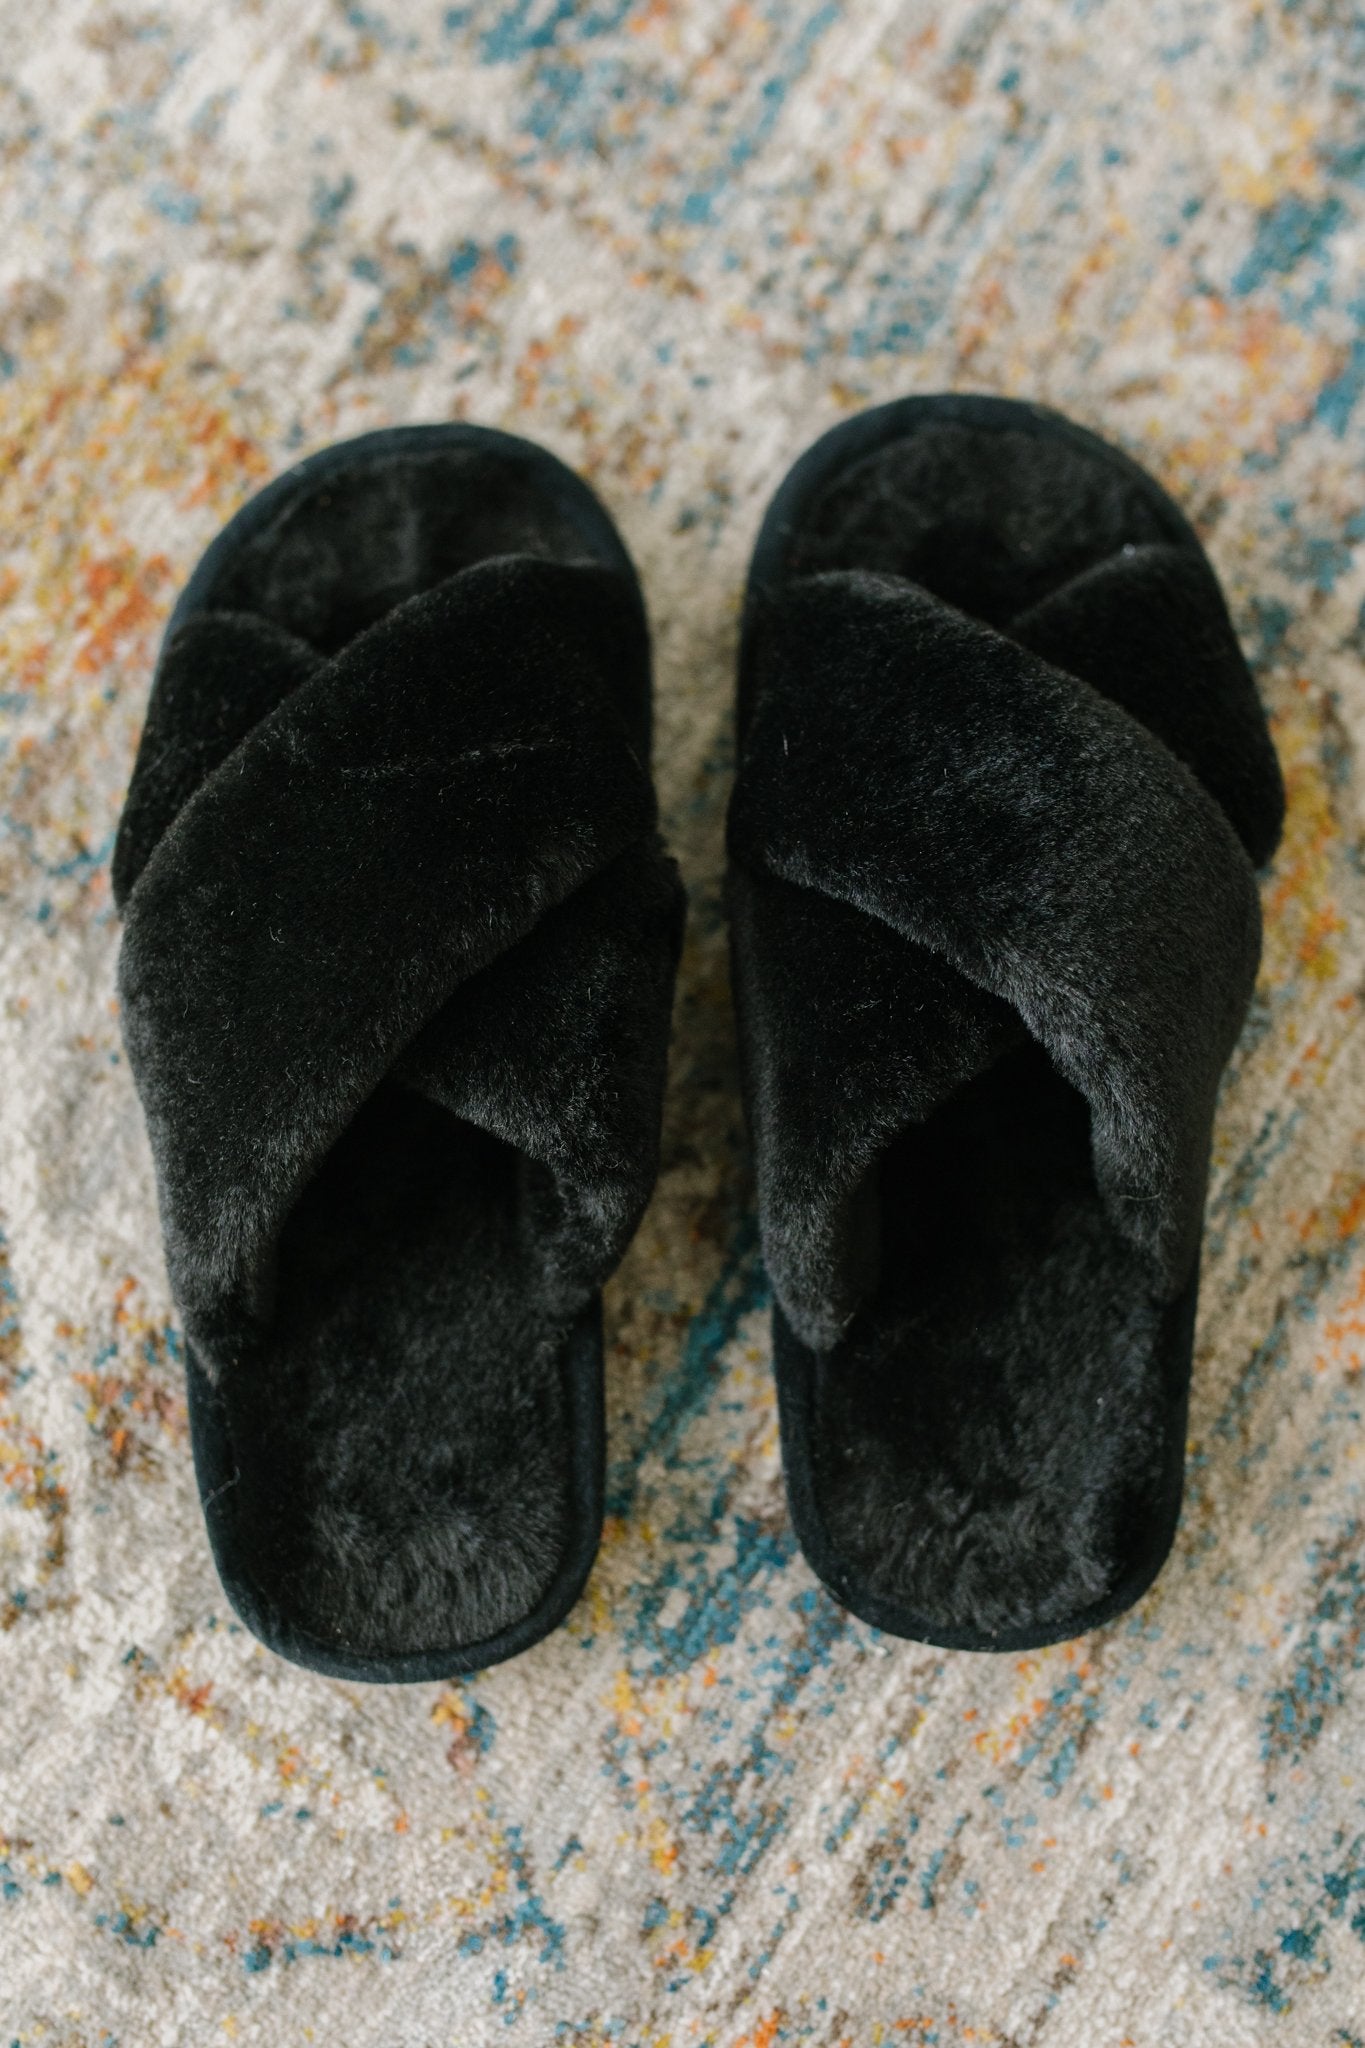 Toasty But Mostly Cozy Black Slippers